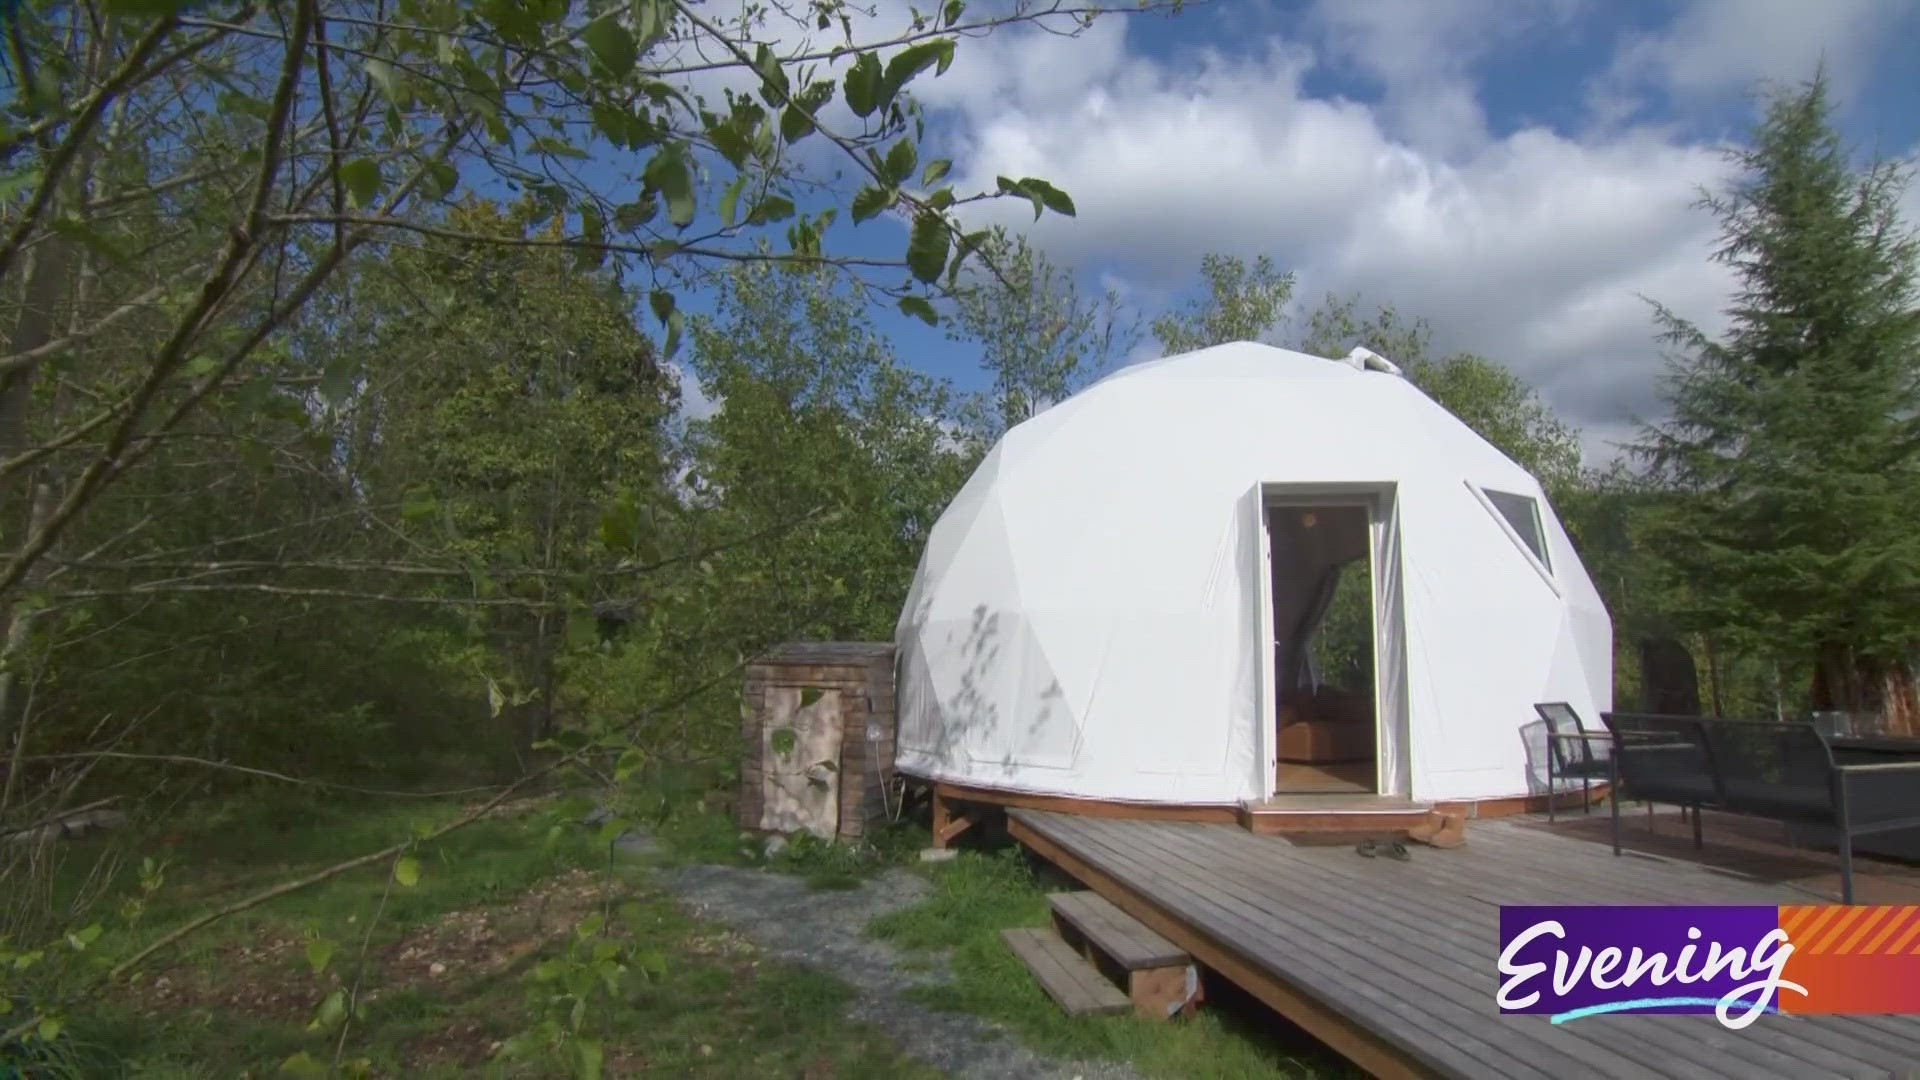 Sky Valley GeoDome is a cozy getaway with views of Snohomish Valley. #k5evening